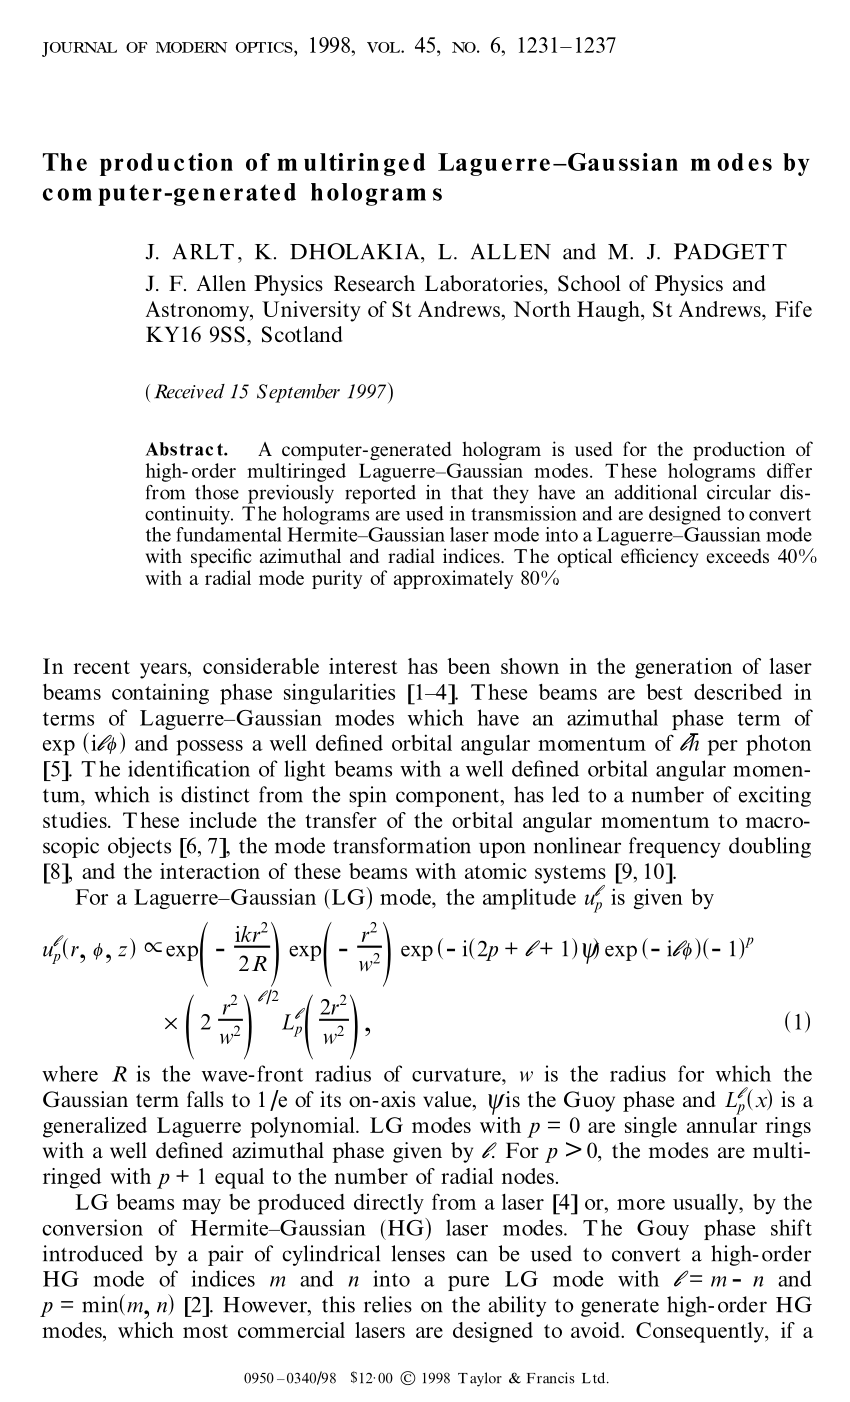 Pdf The Production Of Multiringed Laguerre Gaussian Modes By Computer Generated Holograms